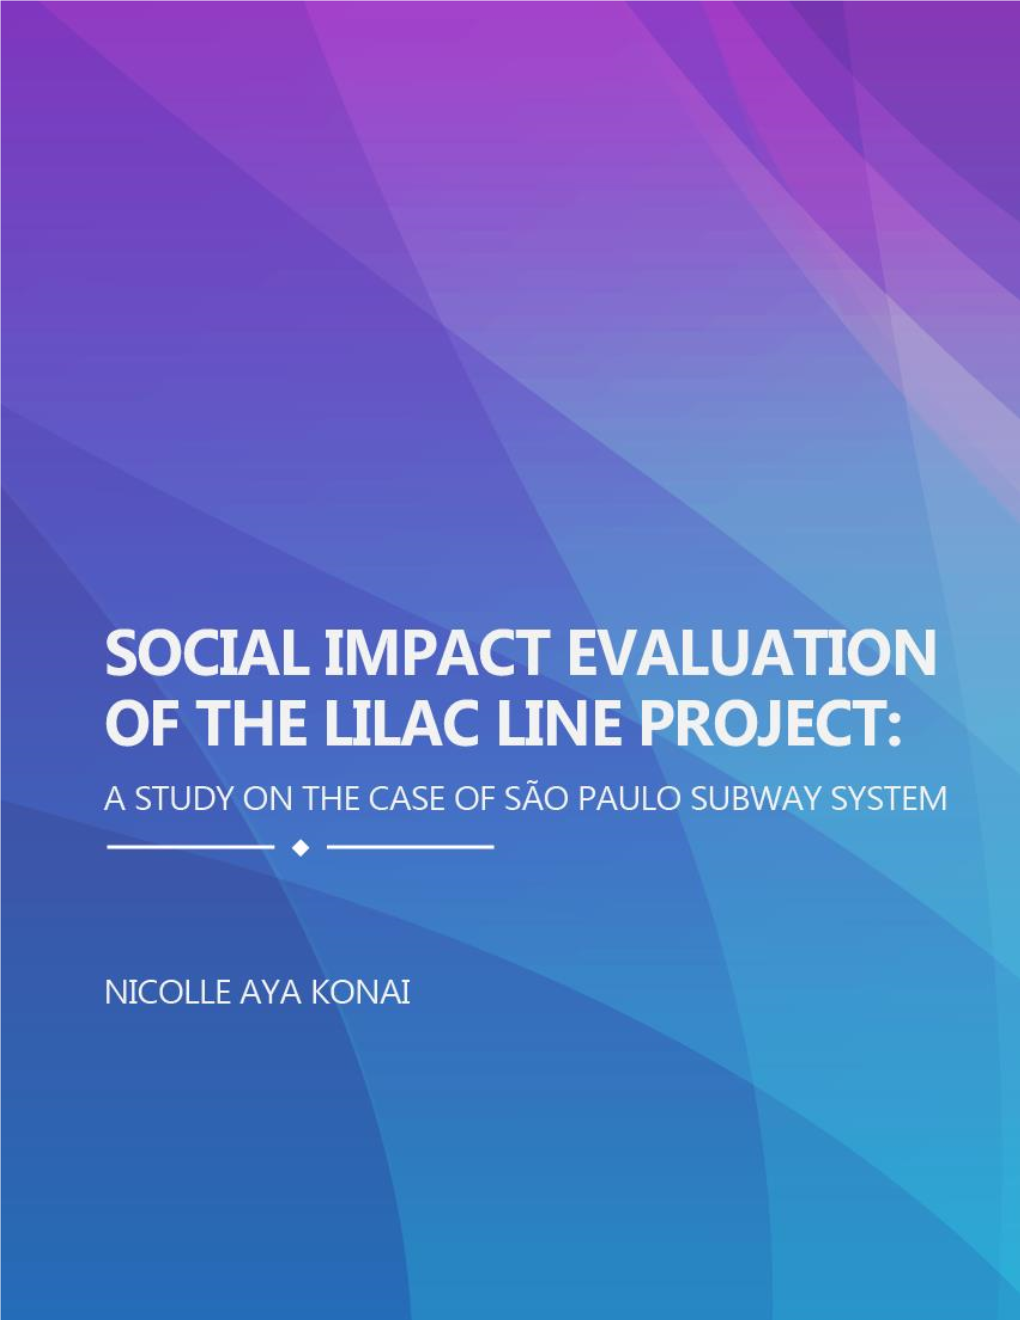 Social Impact Evaluation of the Lilac Line Project: a Study on the Case of São Paulo Subway System